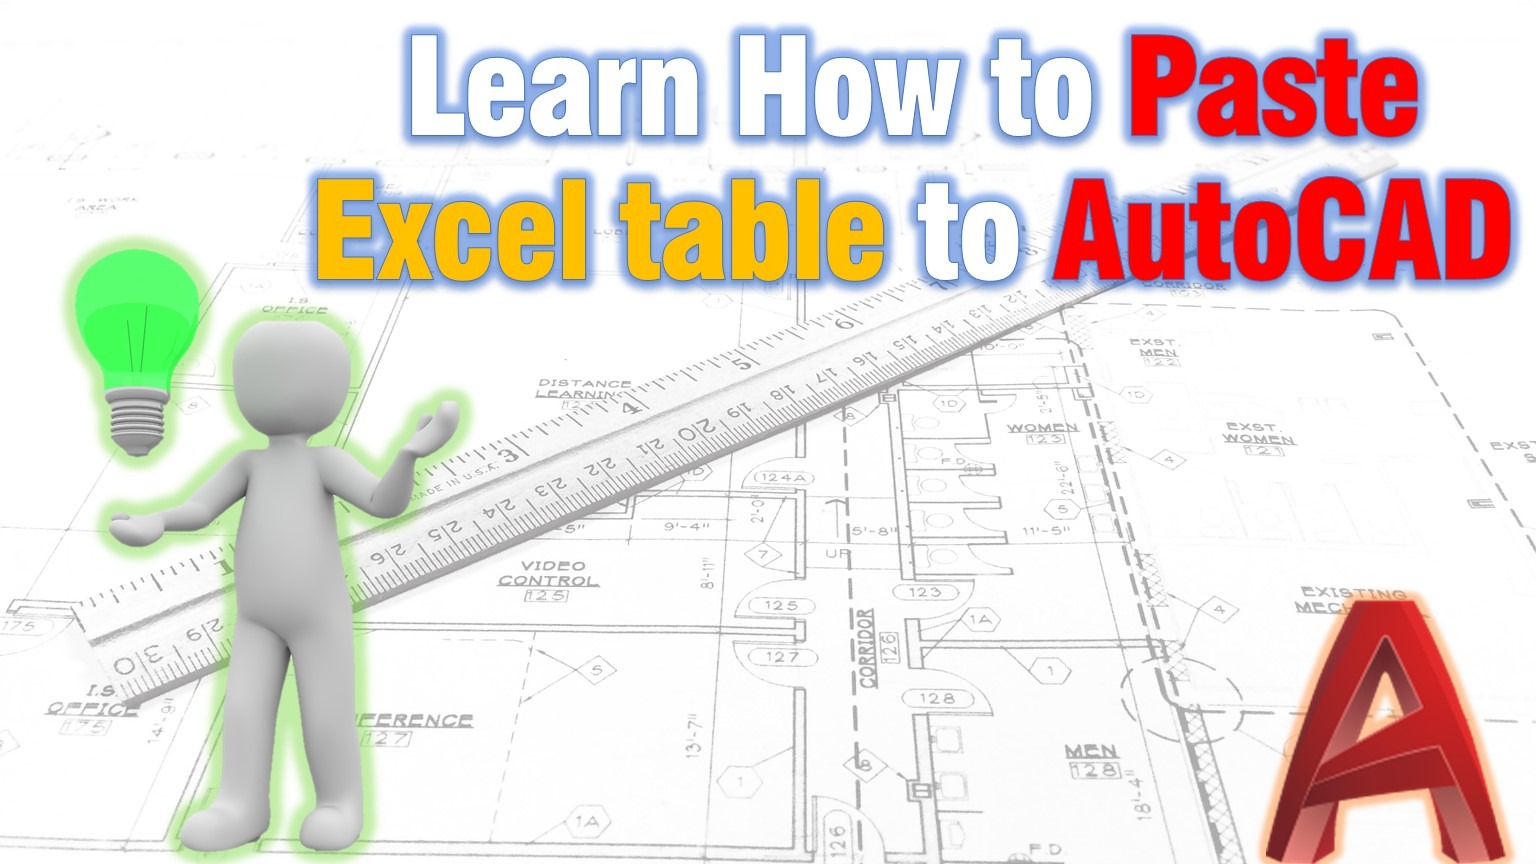 How to paste excel table to AutoCAD